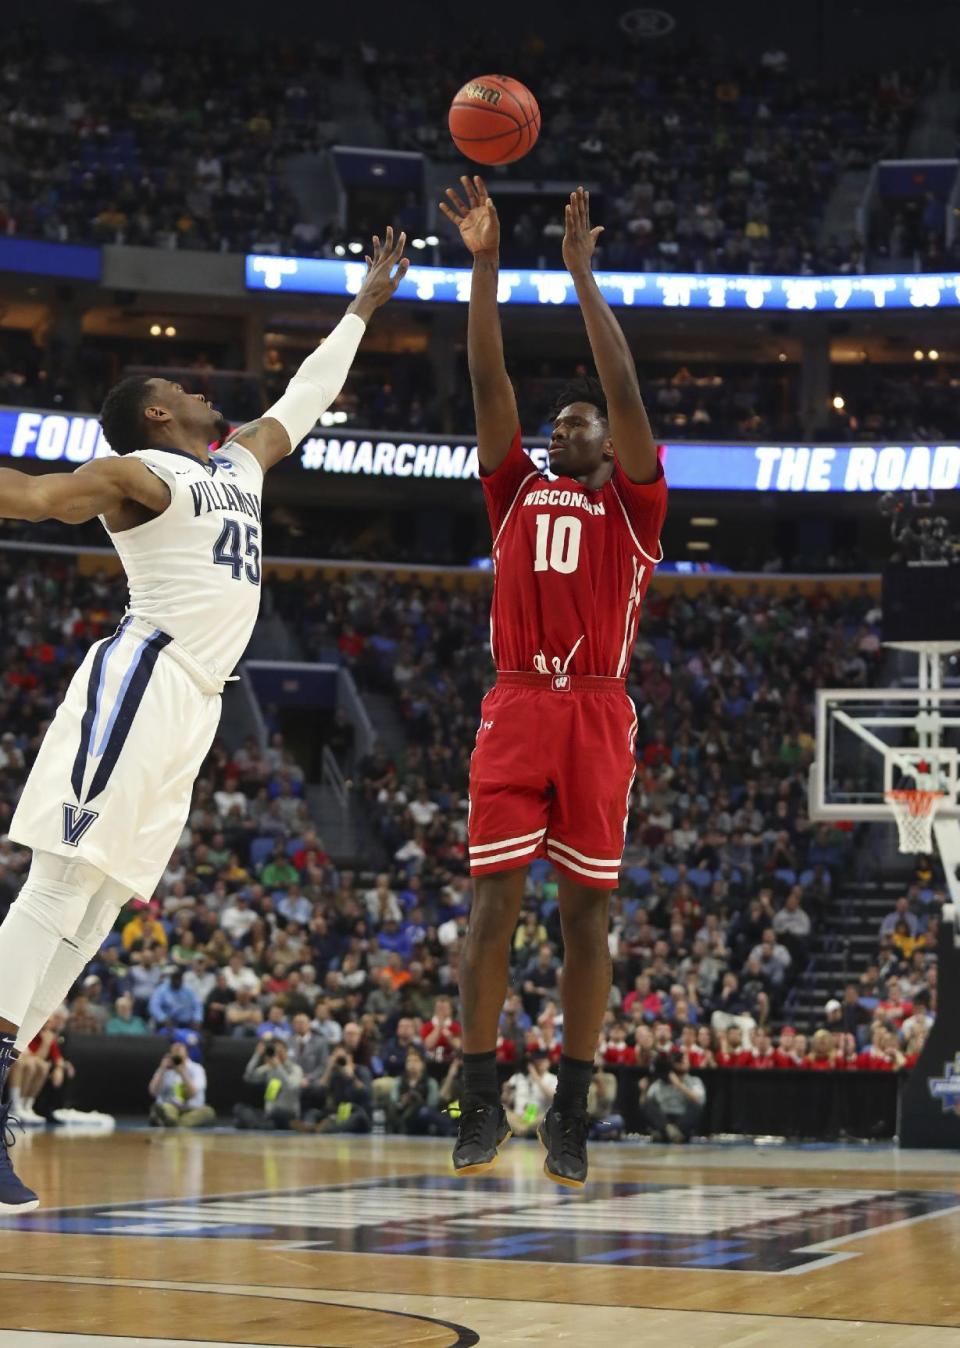 Wisconsin forward Nigel Hayes (10) takes a jump shot against Villanova forward Darryl Reynolds (45) during the first half of a second-round men's college basketball game in the NCAA Tournament, Saturday, March 18, 2017, in Buffalo, N.Y. (AP Photo/Bill Wippert)